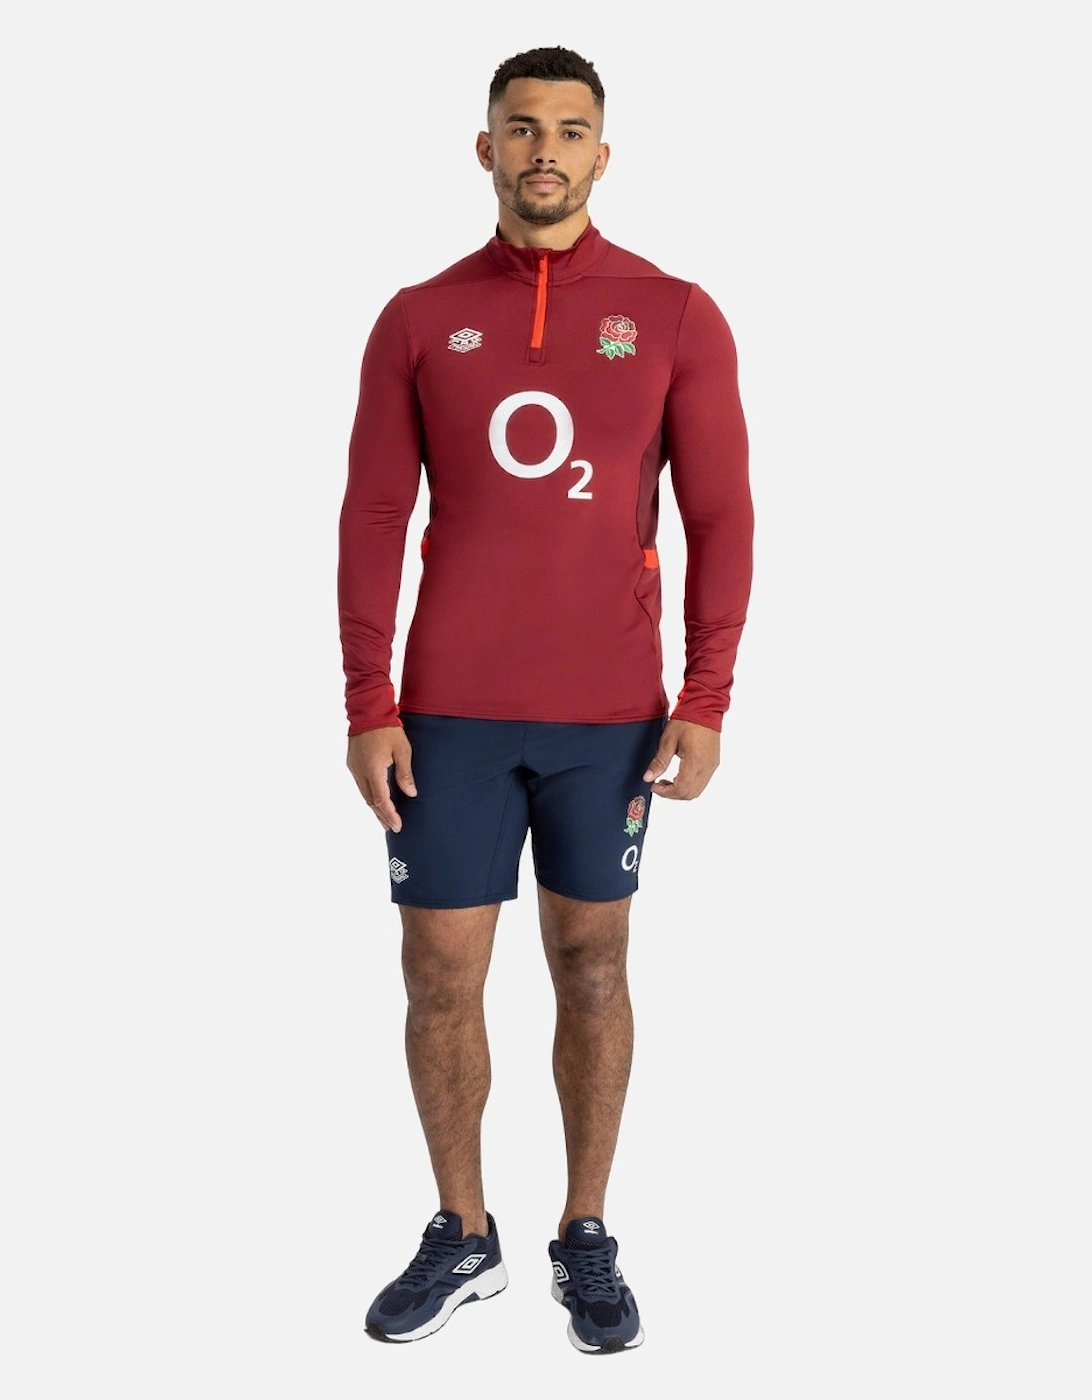 Mens 23/24 England Rugby Midlayer